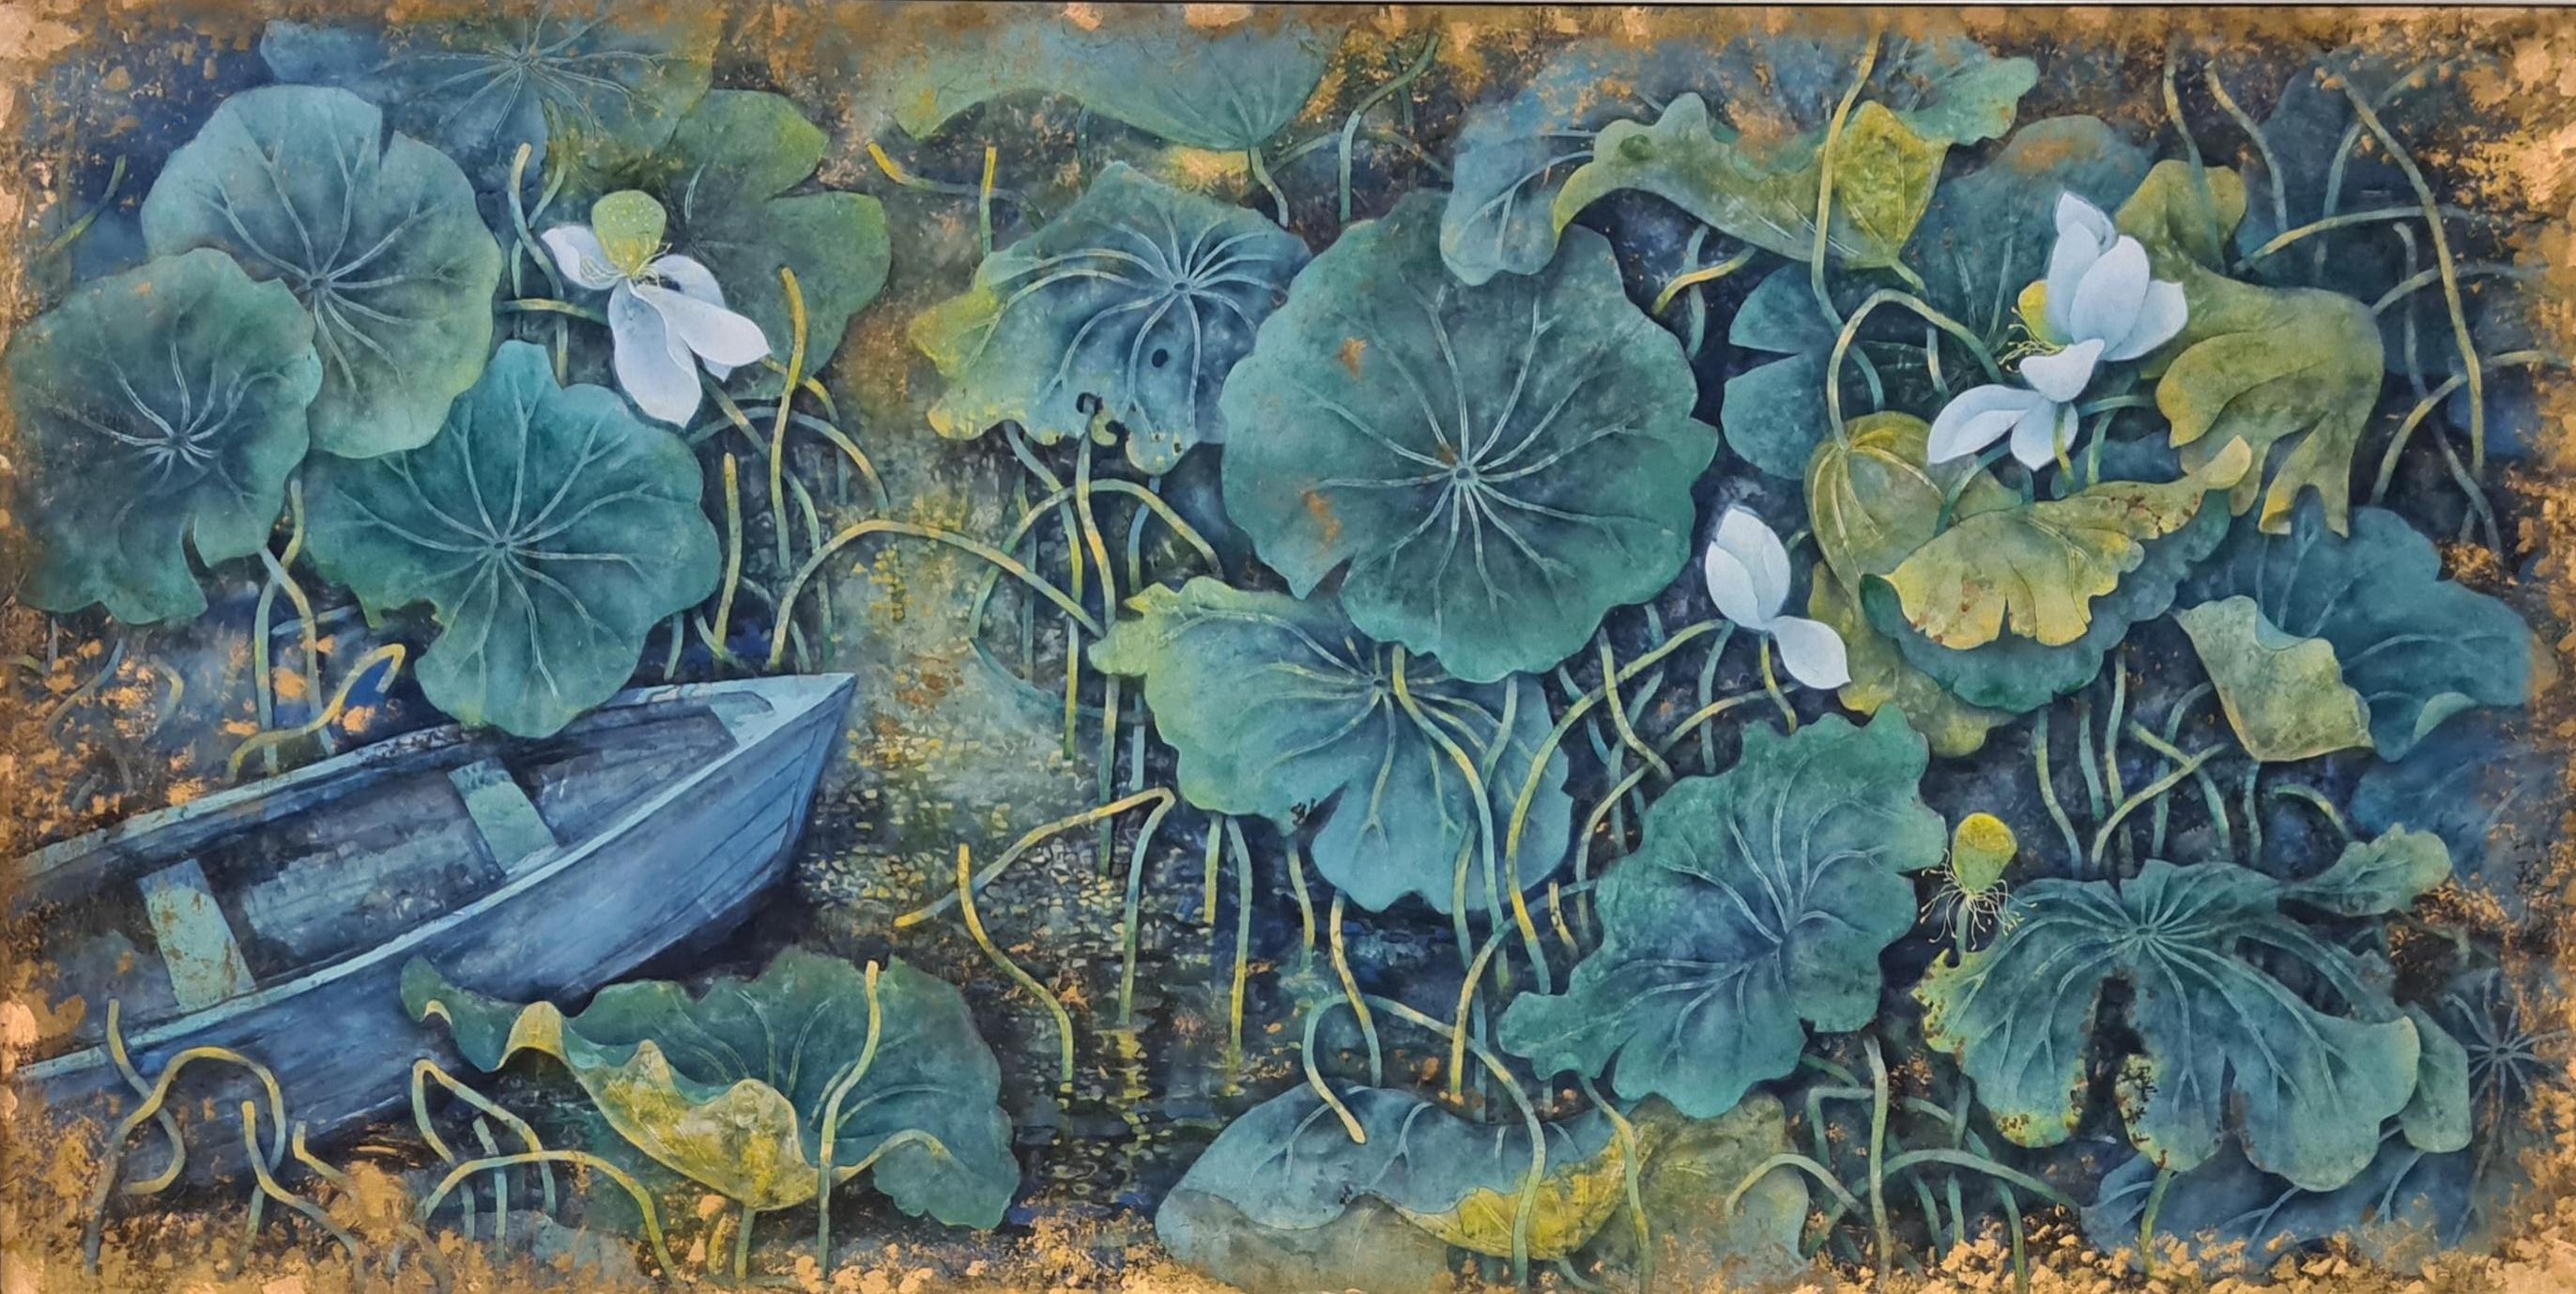 Water lillies, Hommage Zhou Dun-y,  Large Contemporary Chinese Painting on Paper - Art by Shao